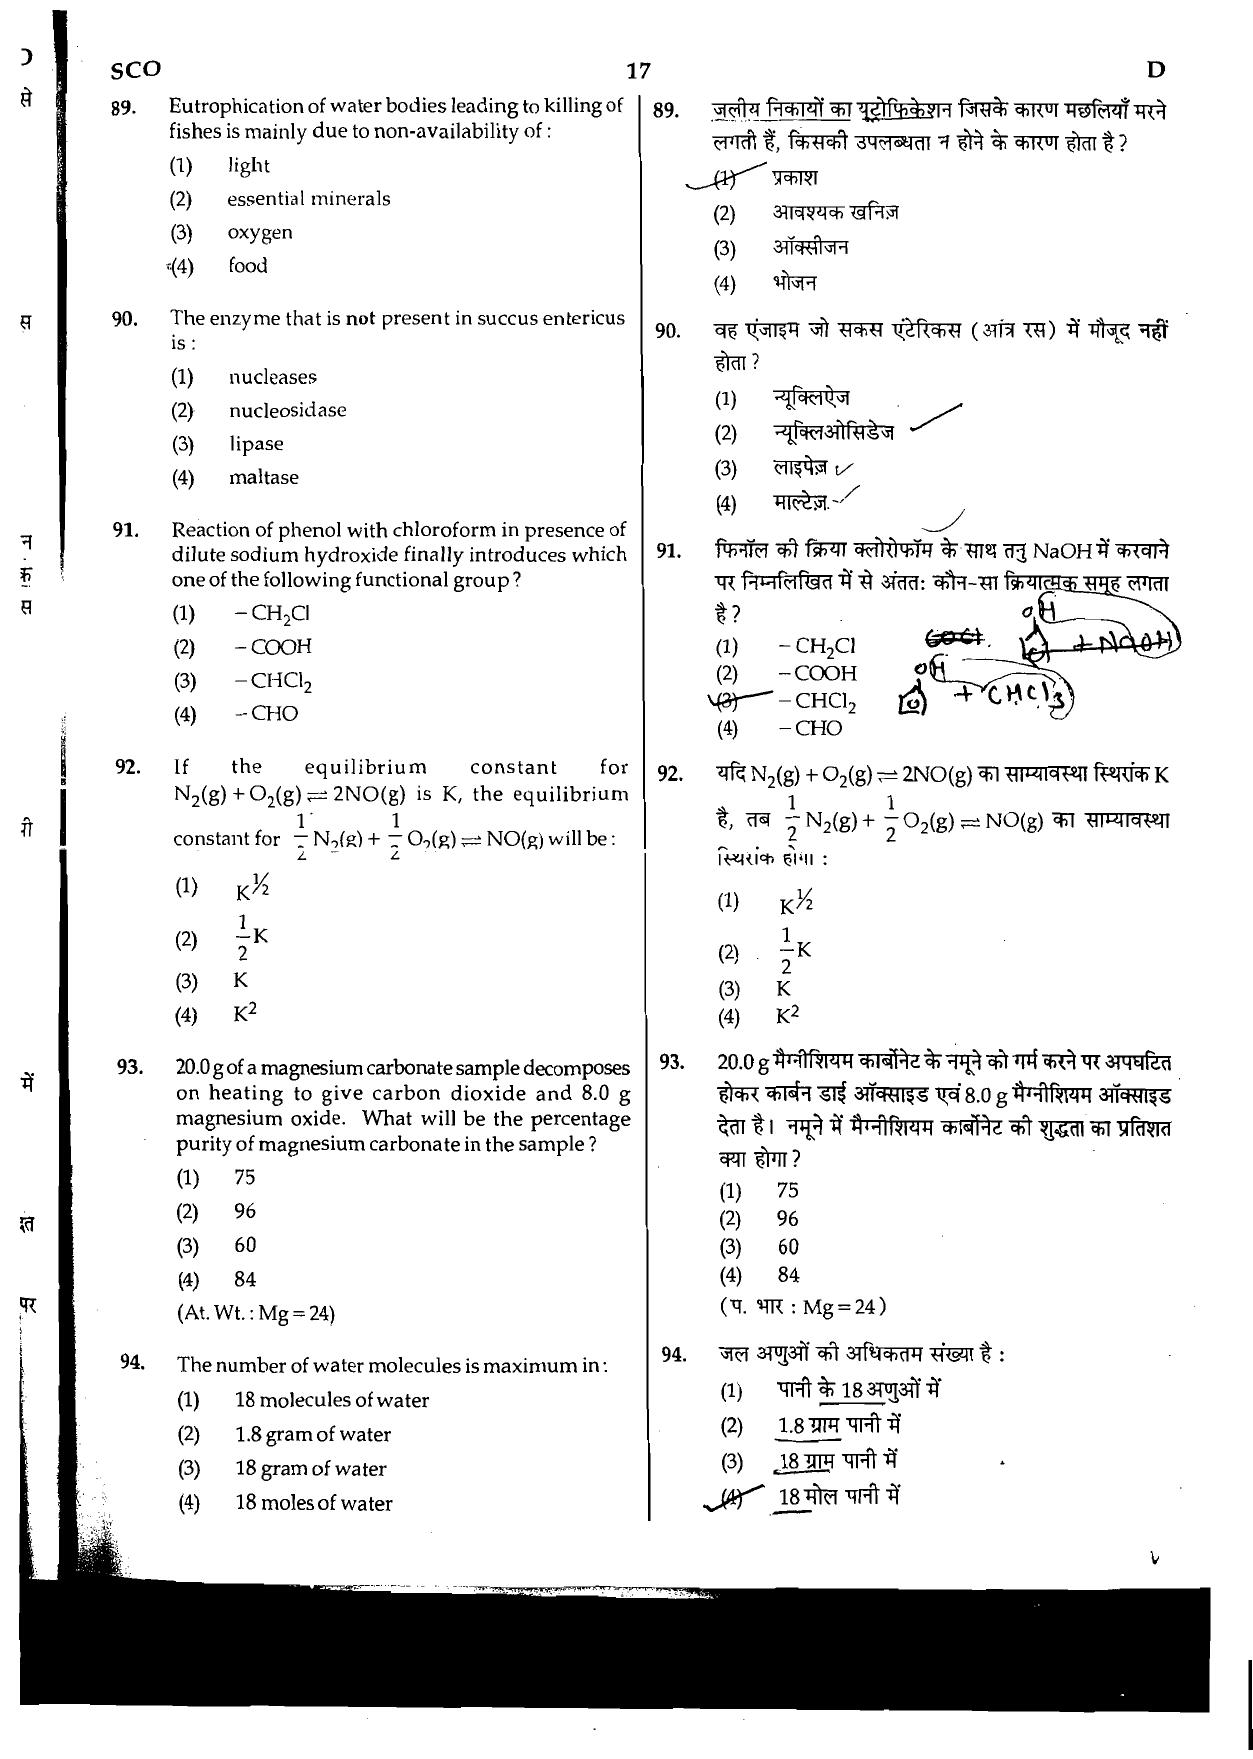 NEET Code D 2015 Question Paper - Page 17